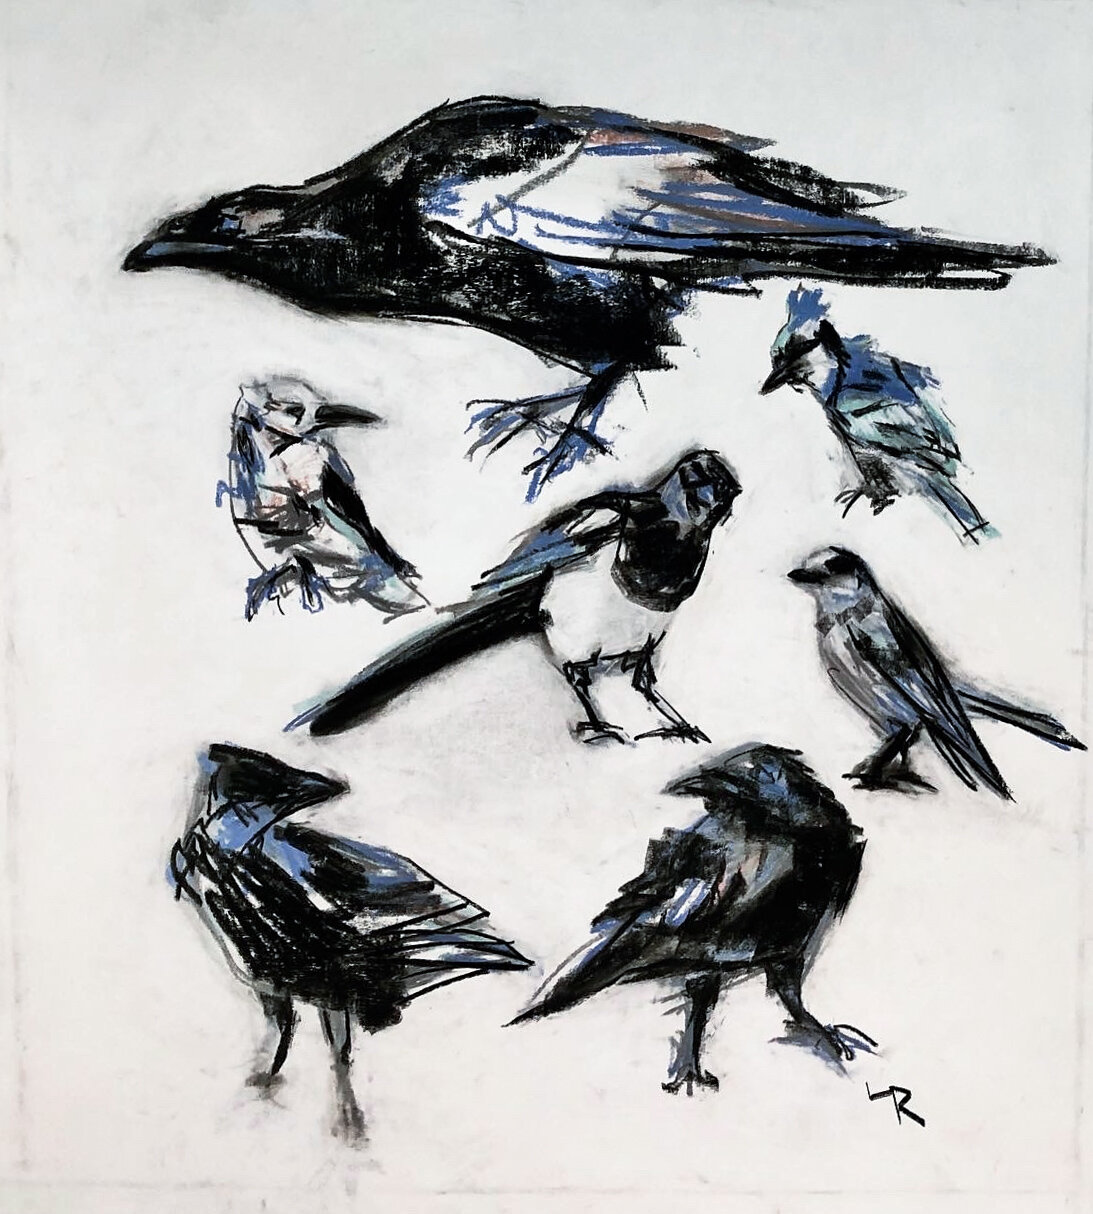 Canadian Corvids- 'Corvid-19' by Leya Russell